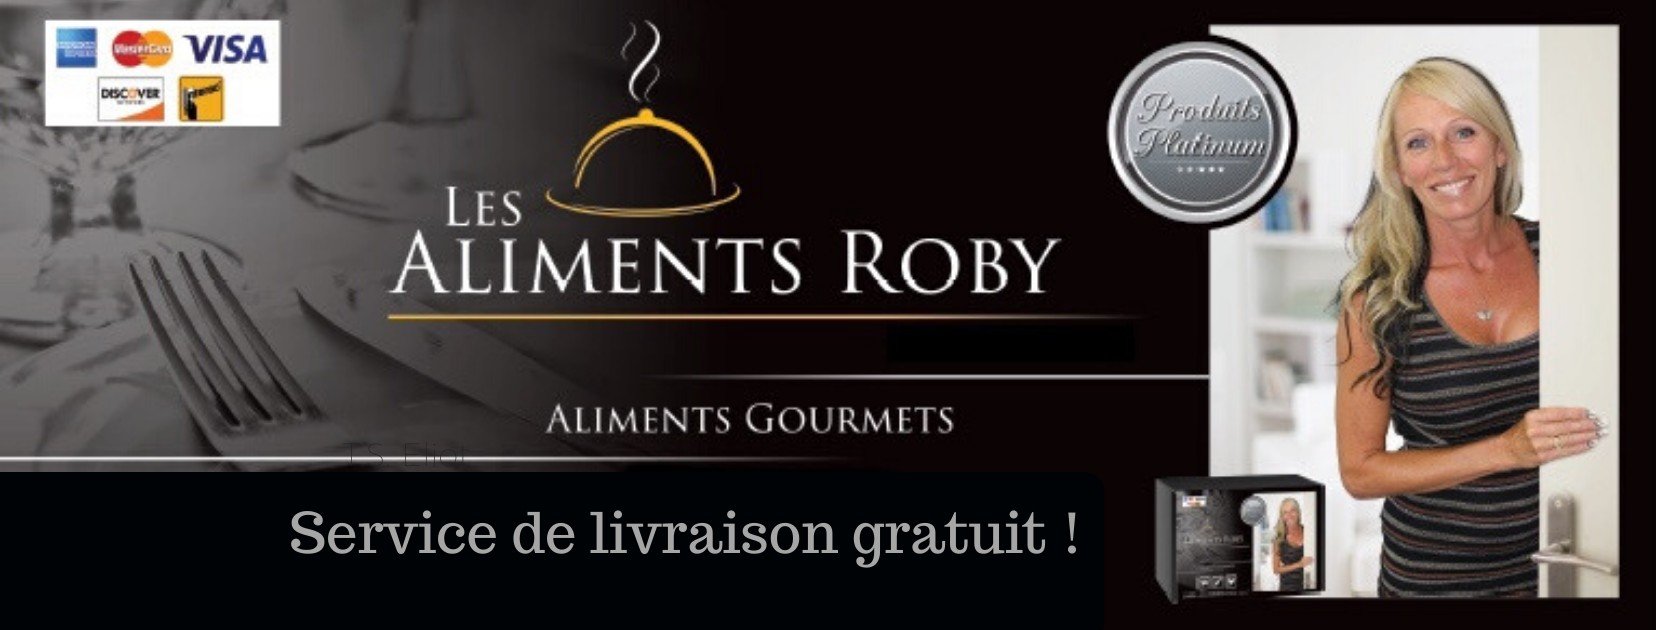 Les Aliments Roby